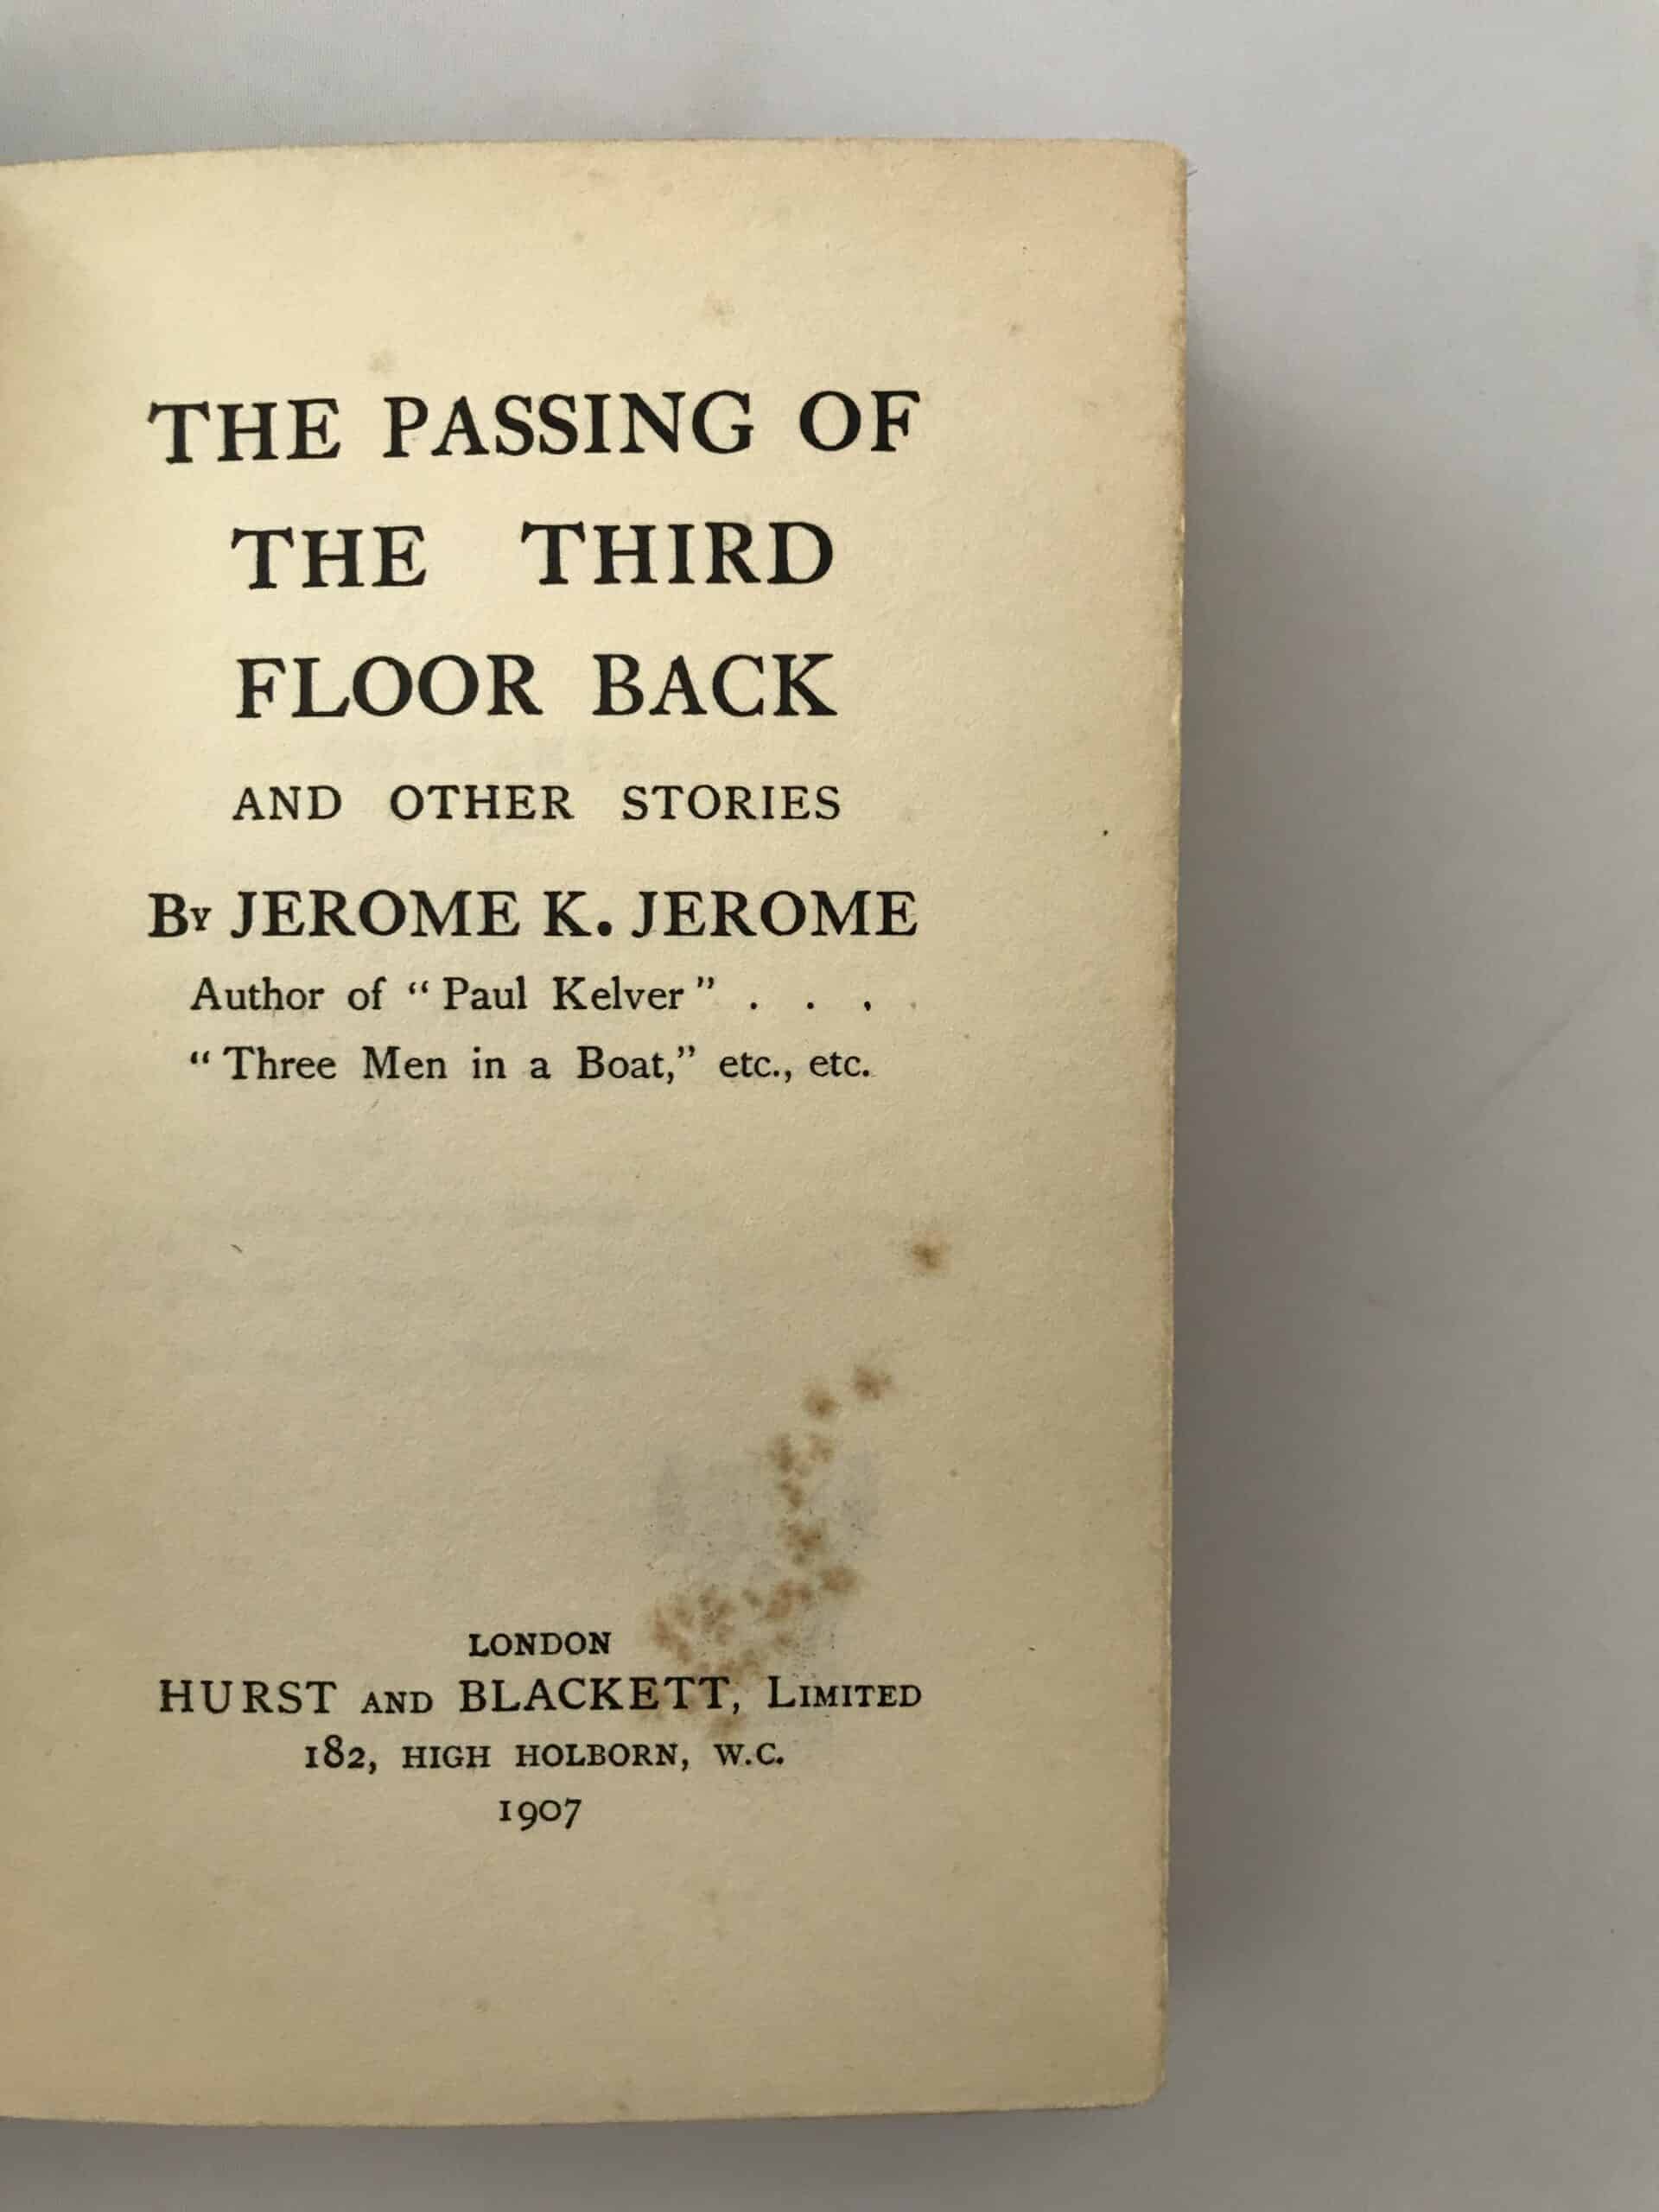 jerome k jerome the passing of the third floor back first edition2